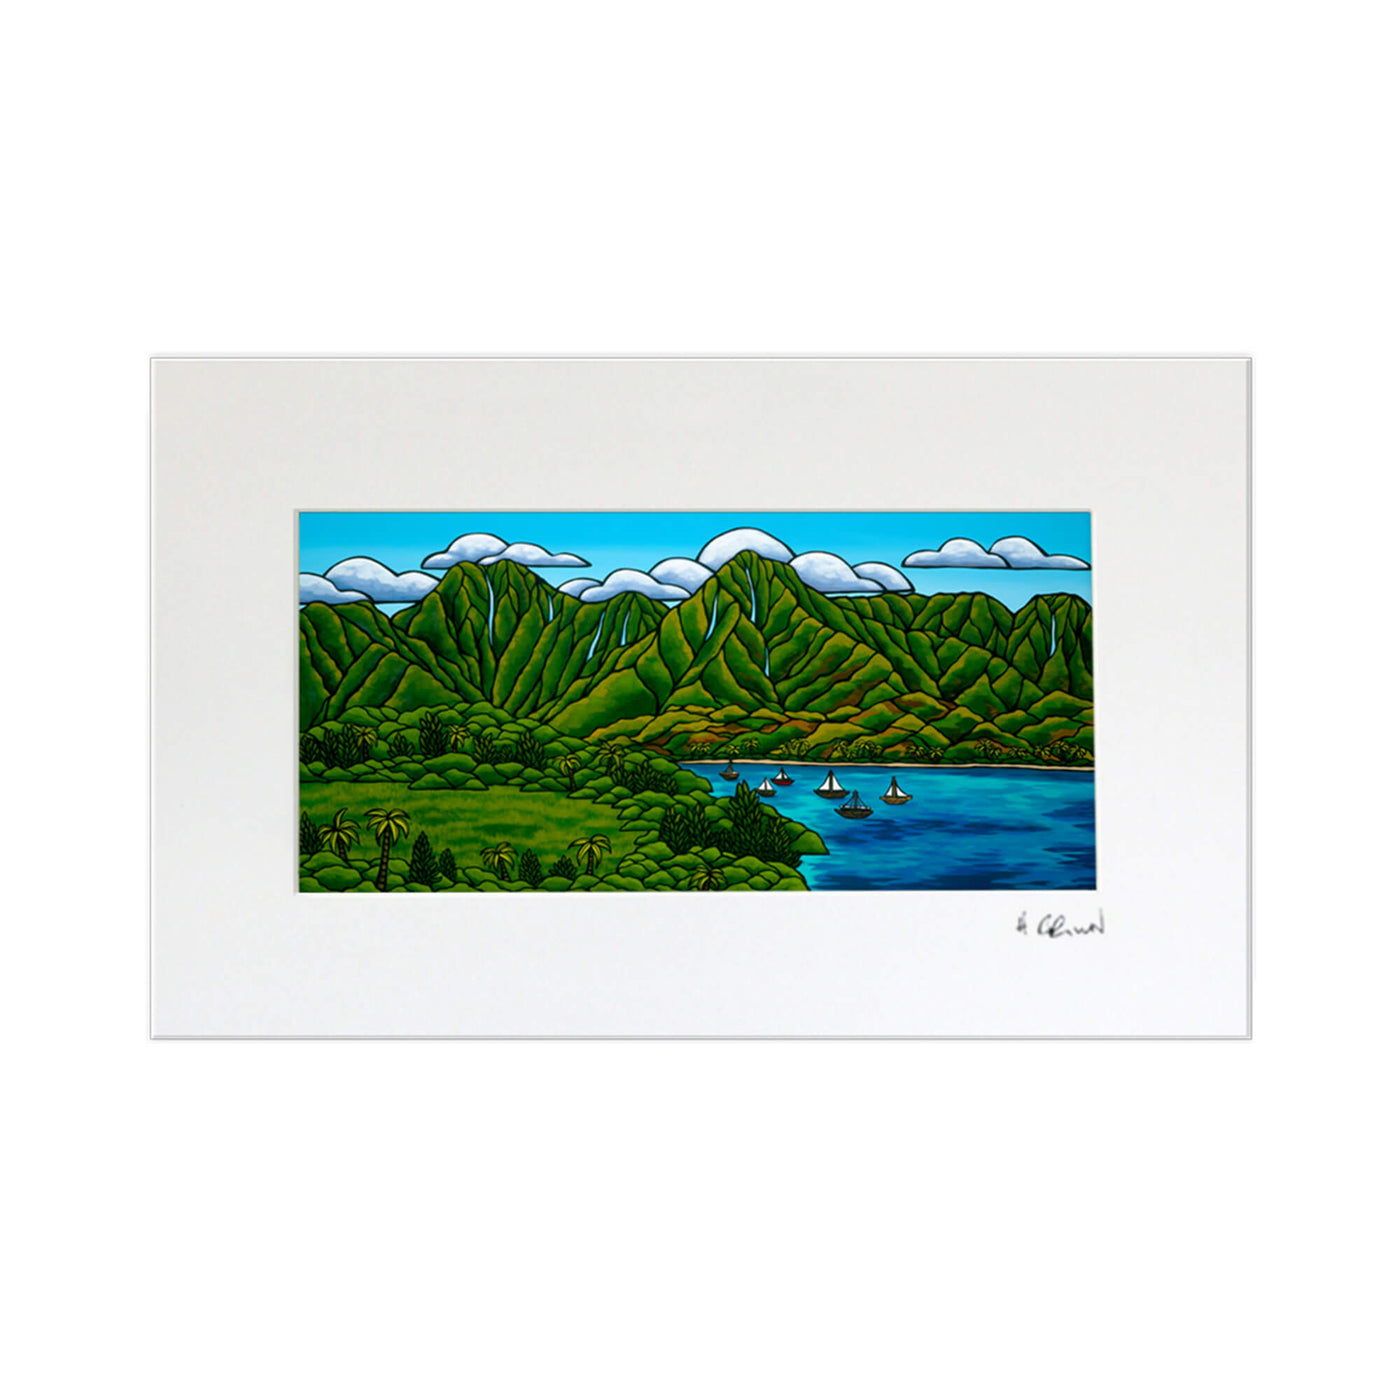 classic landscape in Hawaii by Hawaii surf artist Heather Brown